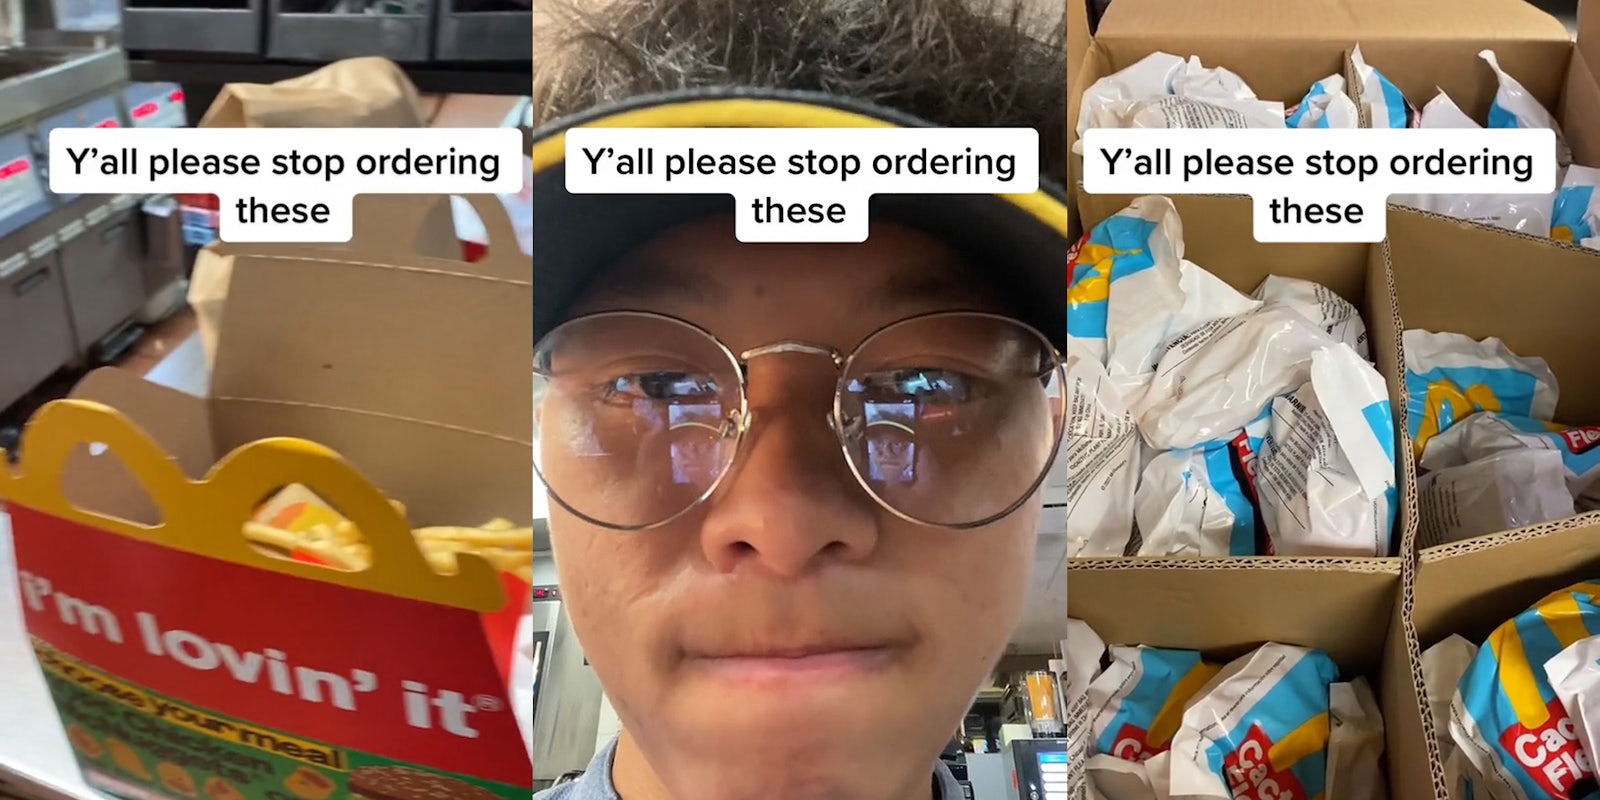 McDonald's adult happy meal caption 'Y'all please stop ordering these' (l) McDonald's worker face with caption 'Y'all please stop ordering these' (c) McDonald's adult happy meal bags of Cactus Flea Market Boxes caption 'Y'all please stop ordering these' (r)